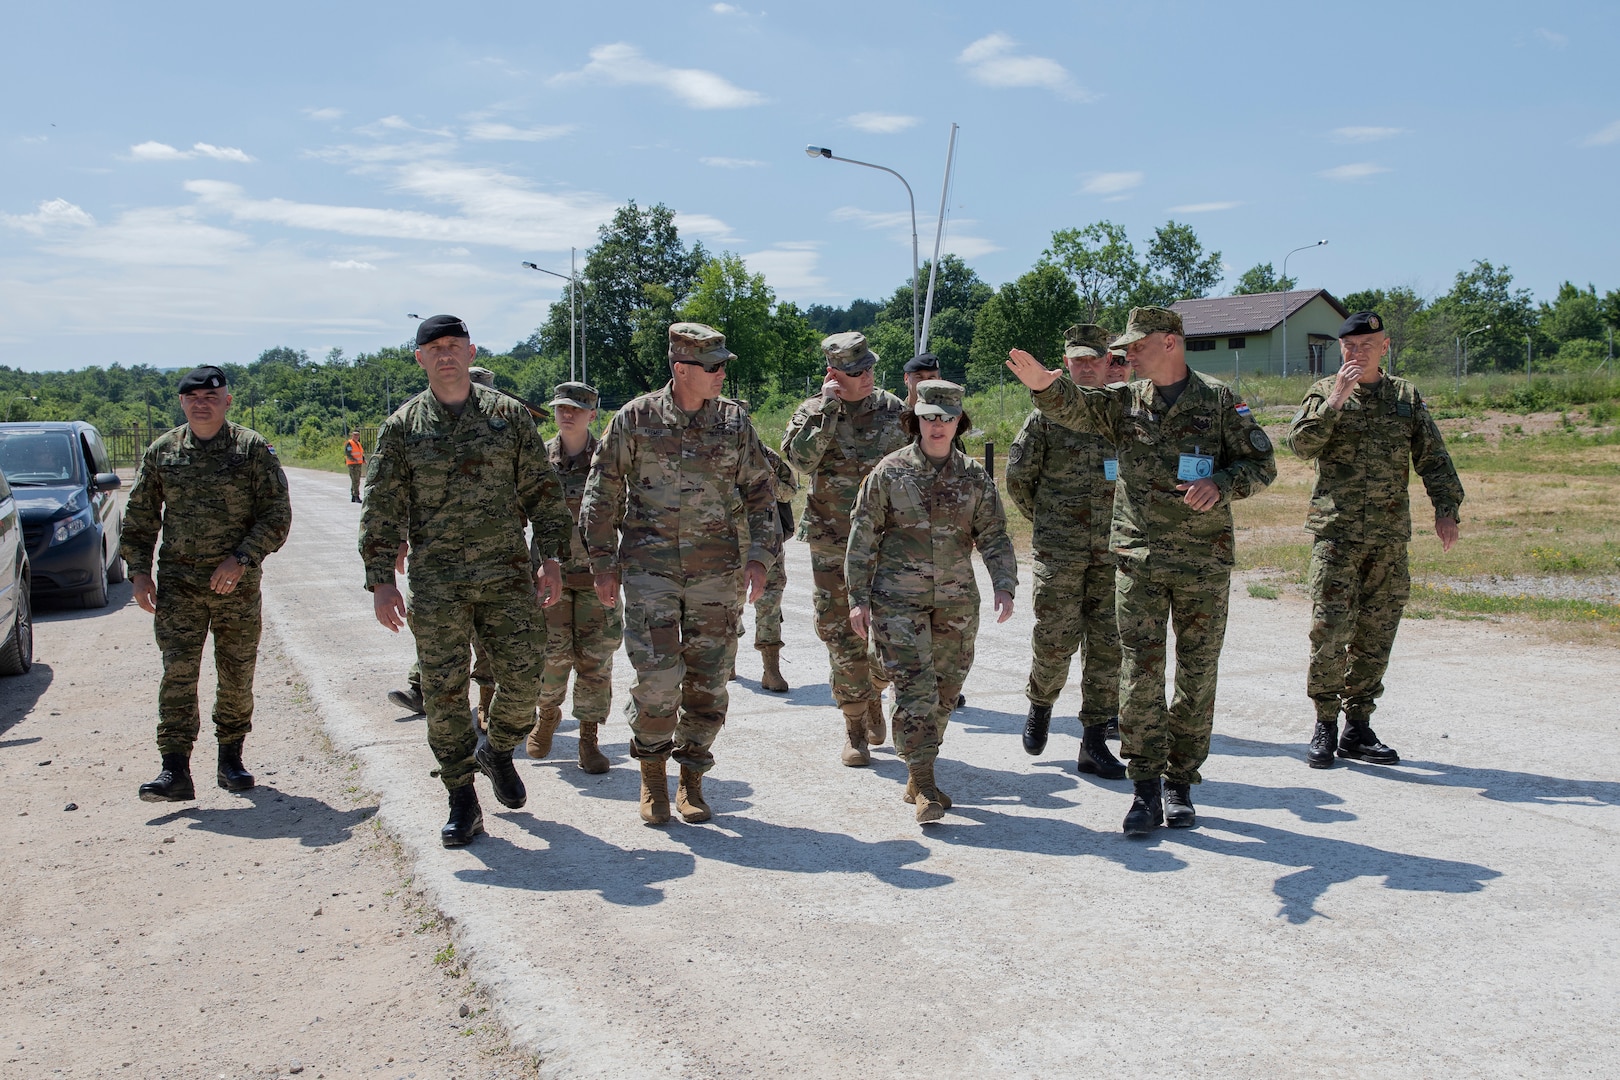 Brig. Gen. Steven Kremer, assistant adjutant general for readiness of the Iowa National Guard, and Maj. Gen. Johanna Clyborne, assistant adjutant general of the Minnesota National Guard, visit the Croatian Armed Forces Best Soldier Competition at the Eugene Kvaternik Military Training Area in Slunj, Croatia, June 16, 2021. Sgt. Jakob Ellingson, with the 114th Transportation Company, Minnesota National Guard, participated in the CAF Best Soldier Competition as part of the State Partnership Program.